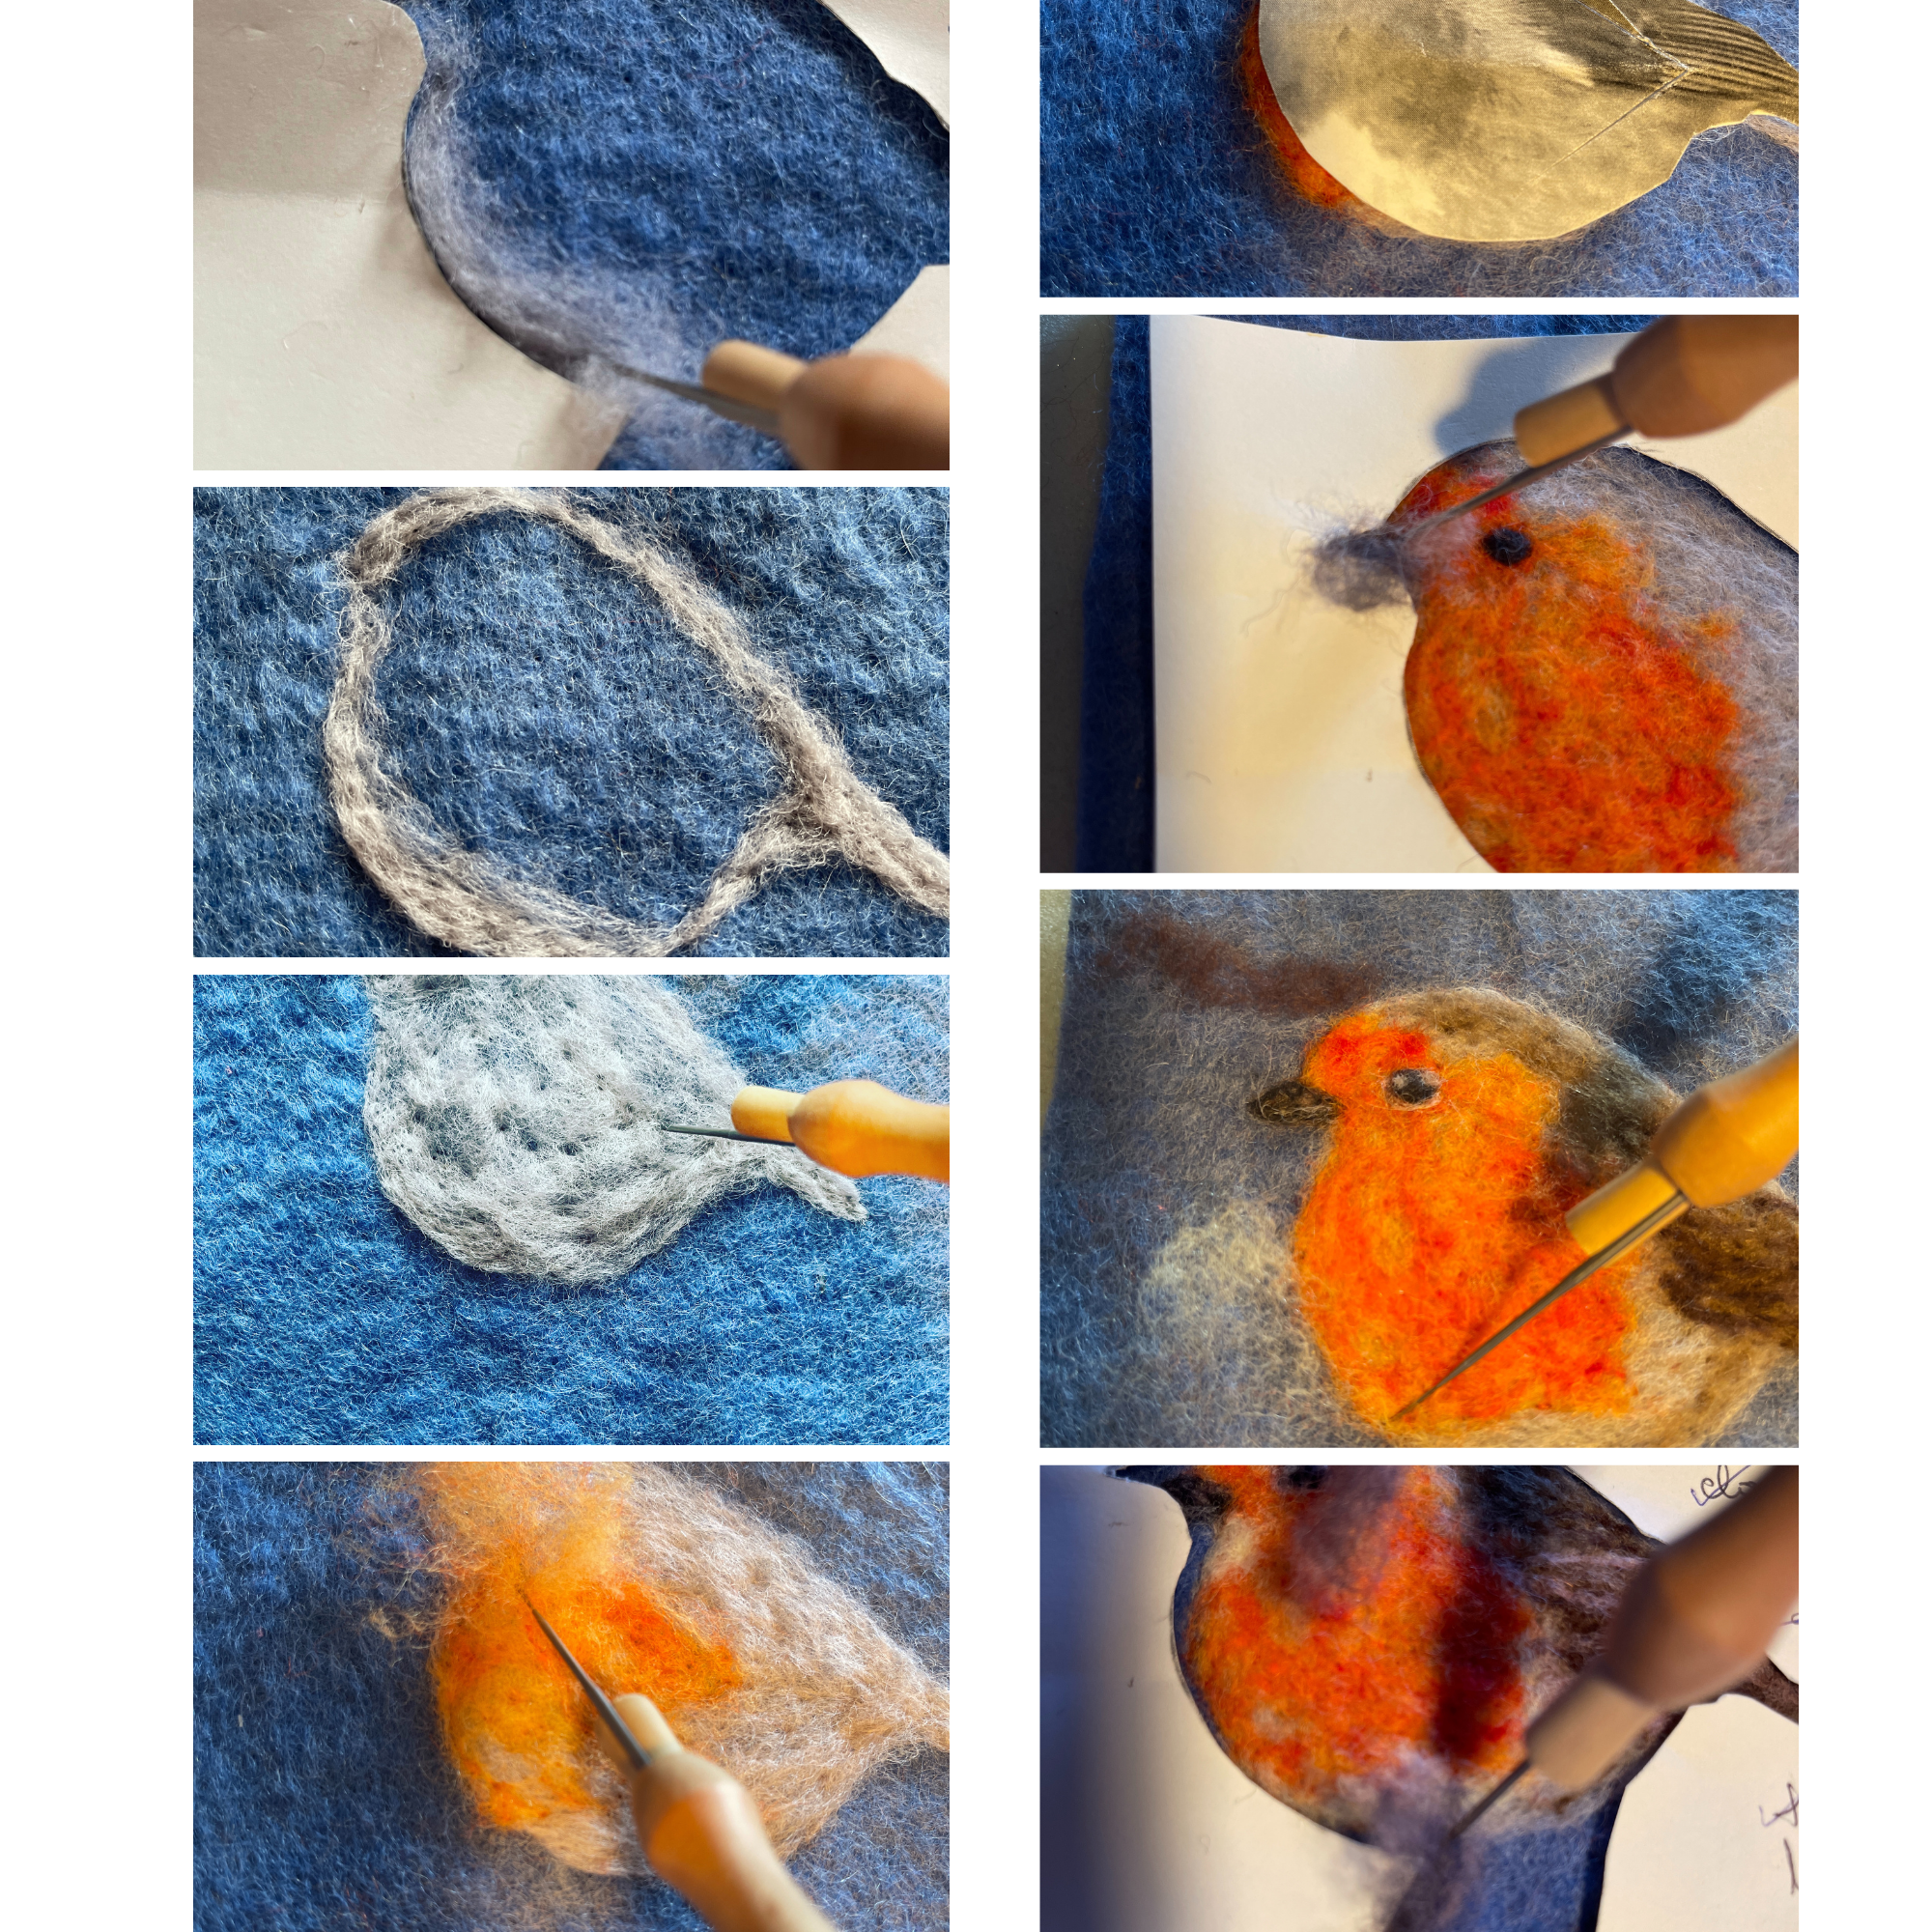 EASY Painting with Wool!   2D Needle Felted Picture Kit - Robin